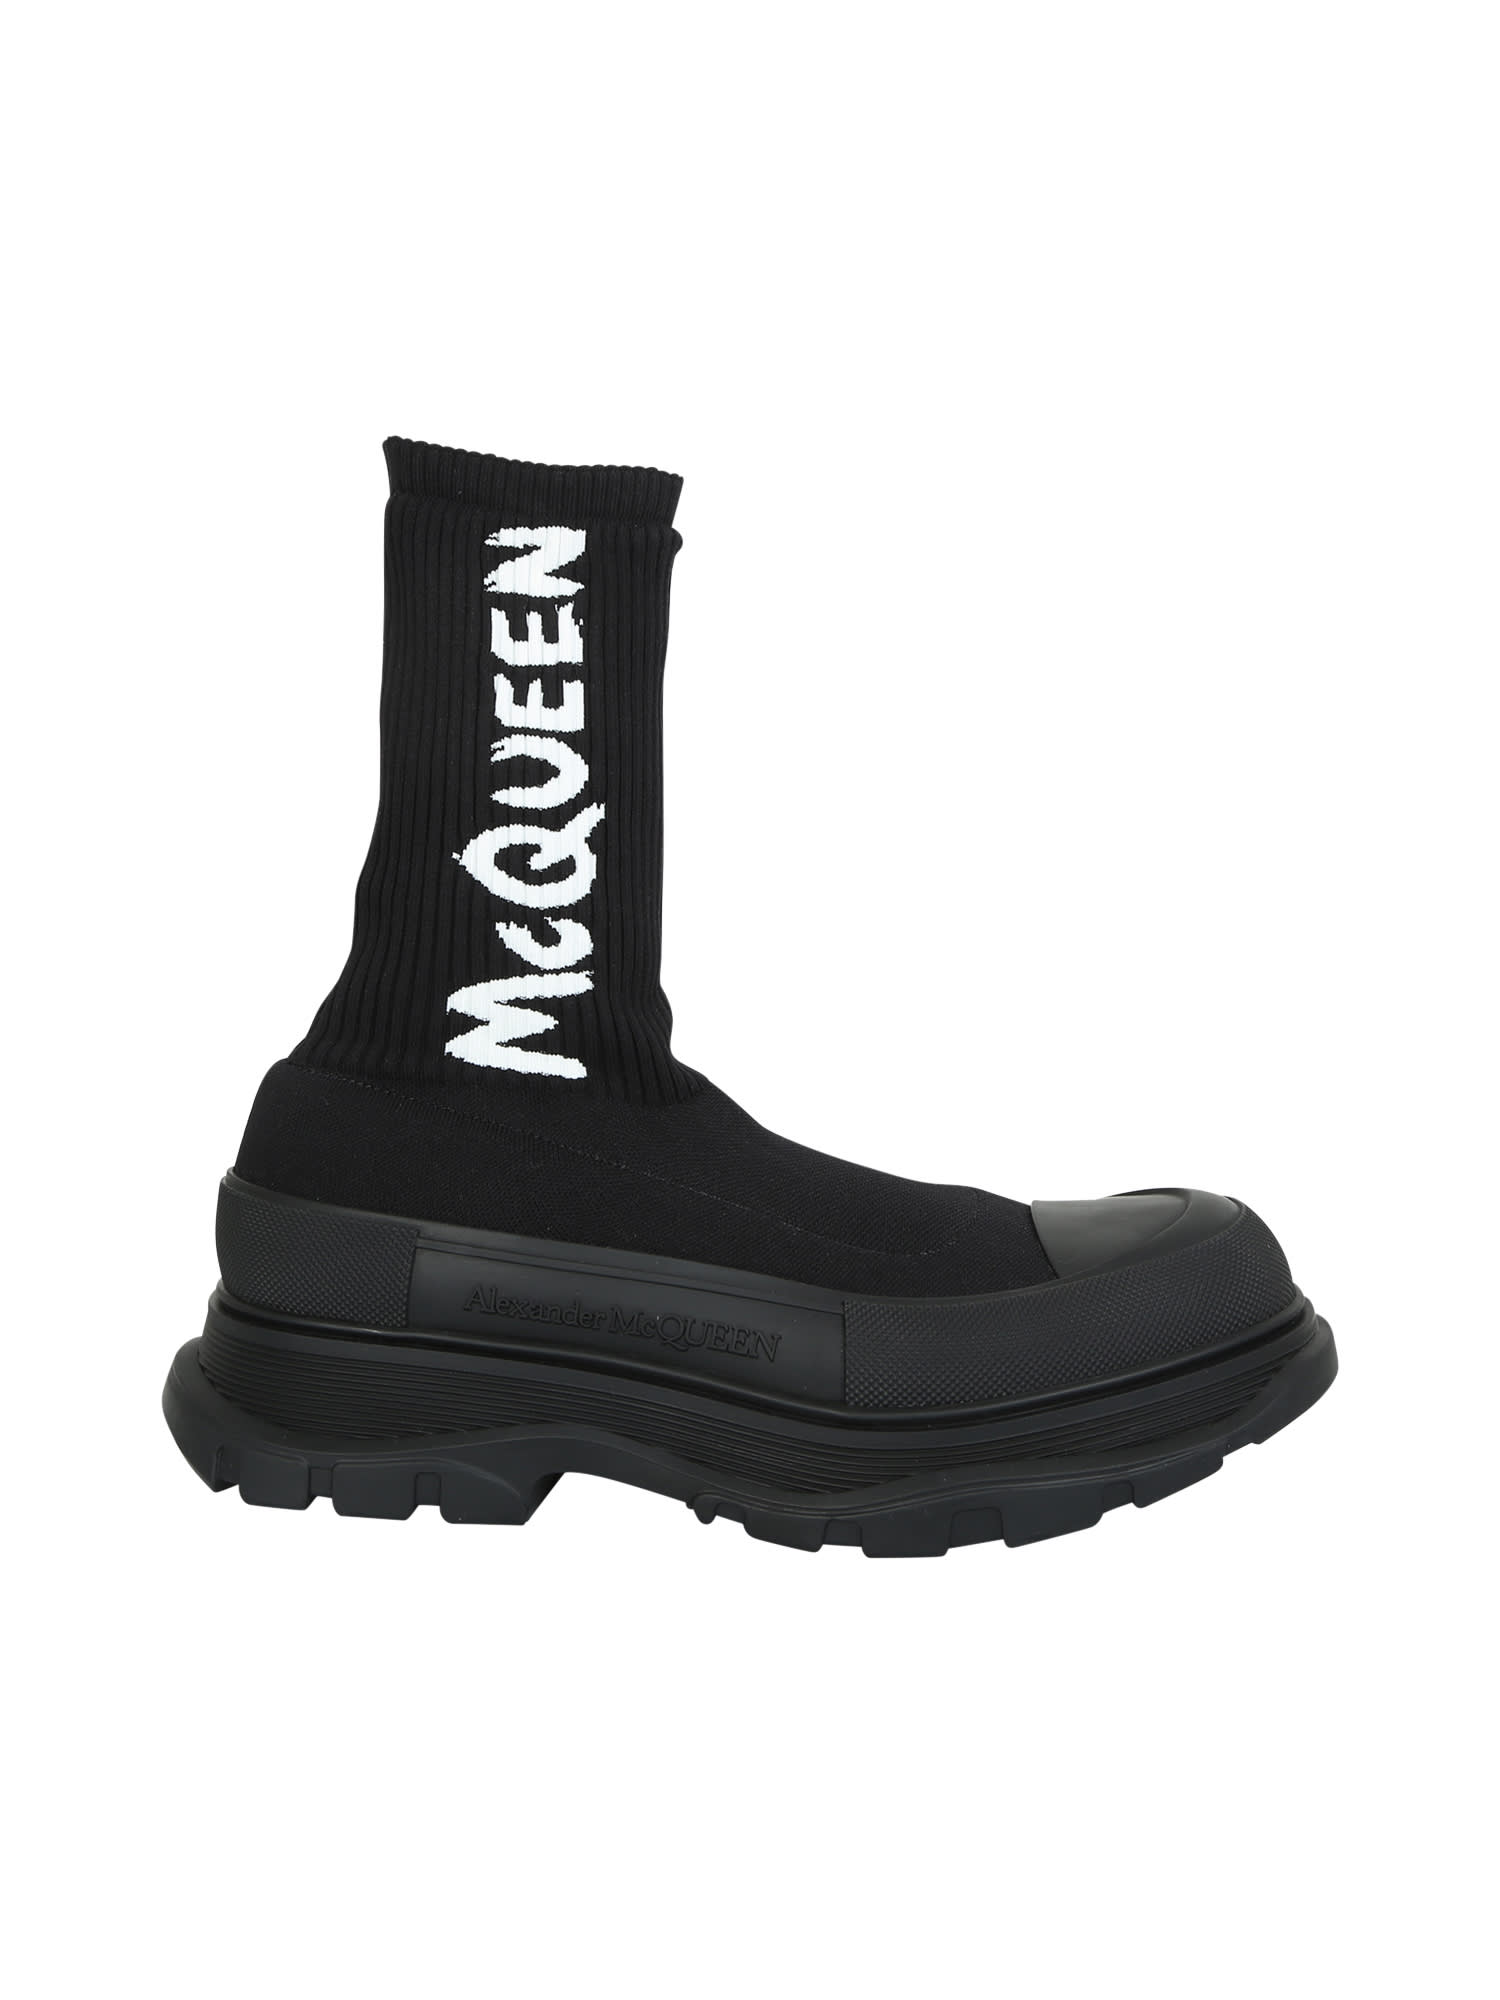 Alexander McQueen Boot Featuring A Ribbed Knit Sock Upper Finished With A Mcqueen Graffiti Signature And An Oversized Rubber Tread Sole.